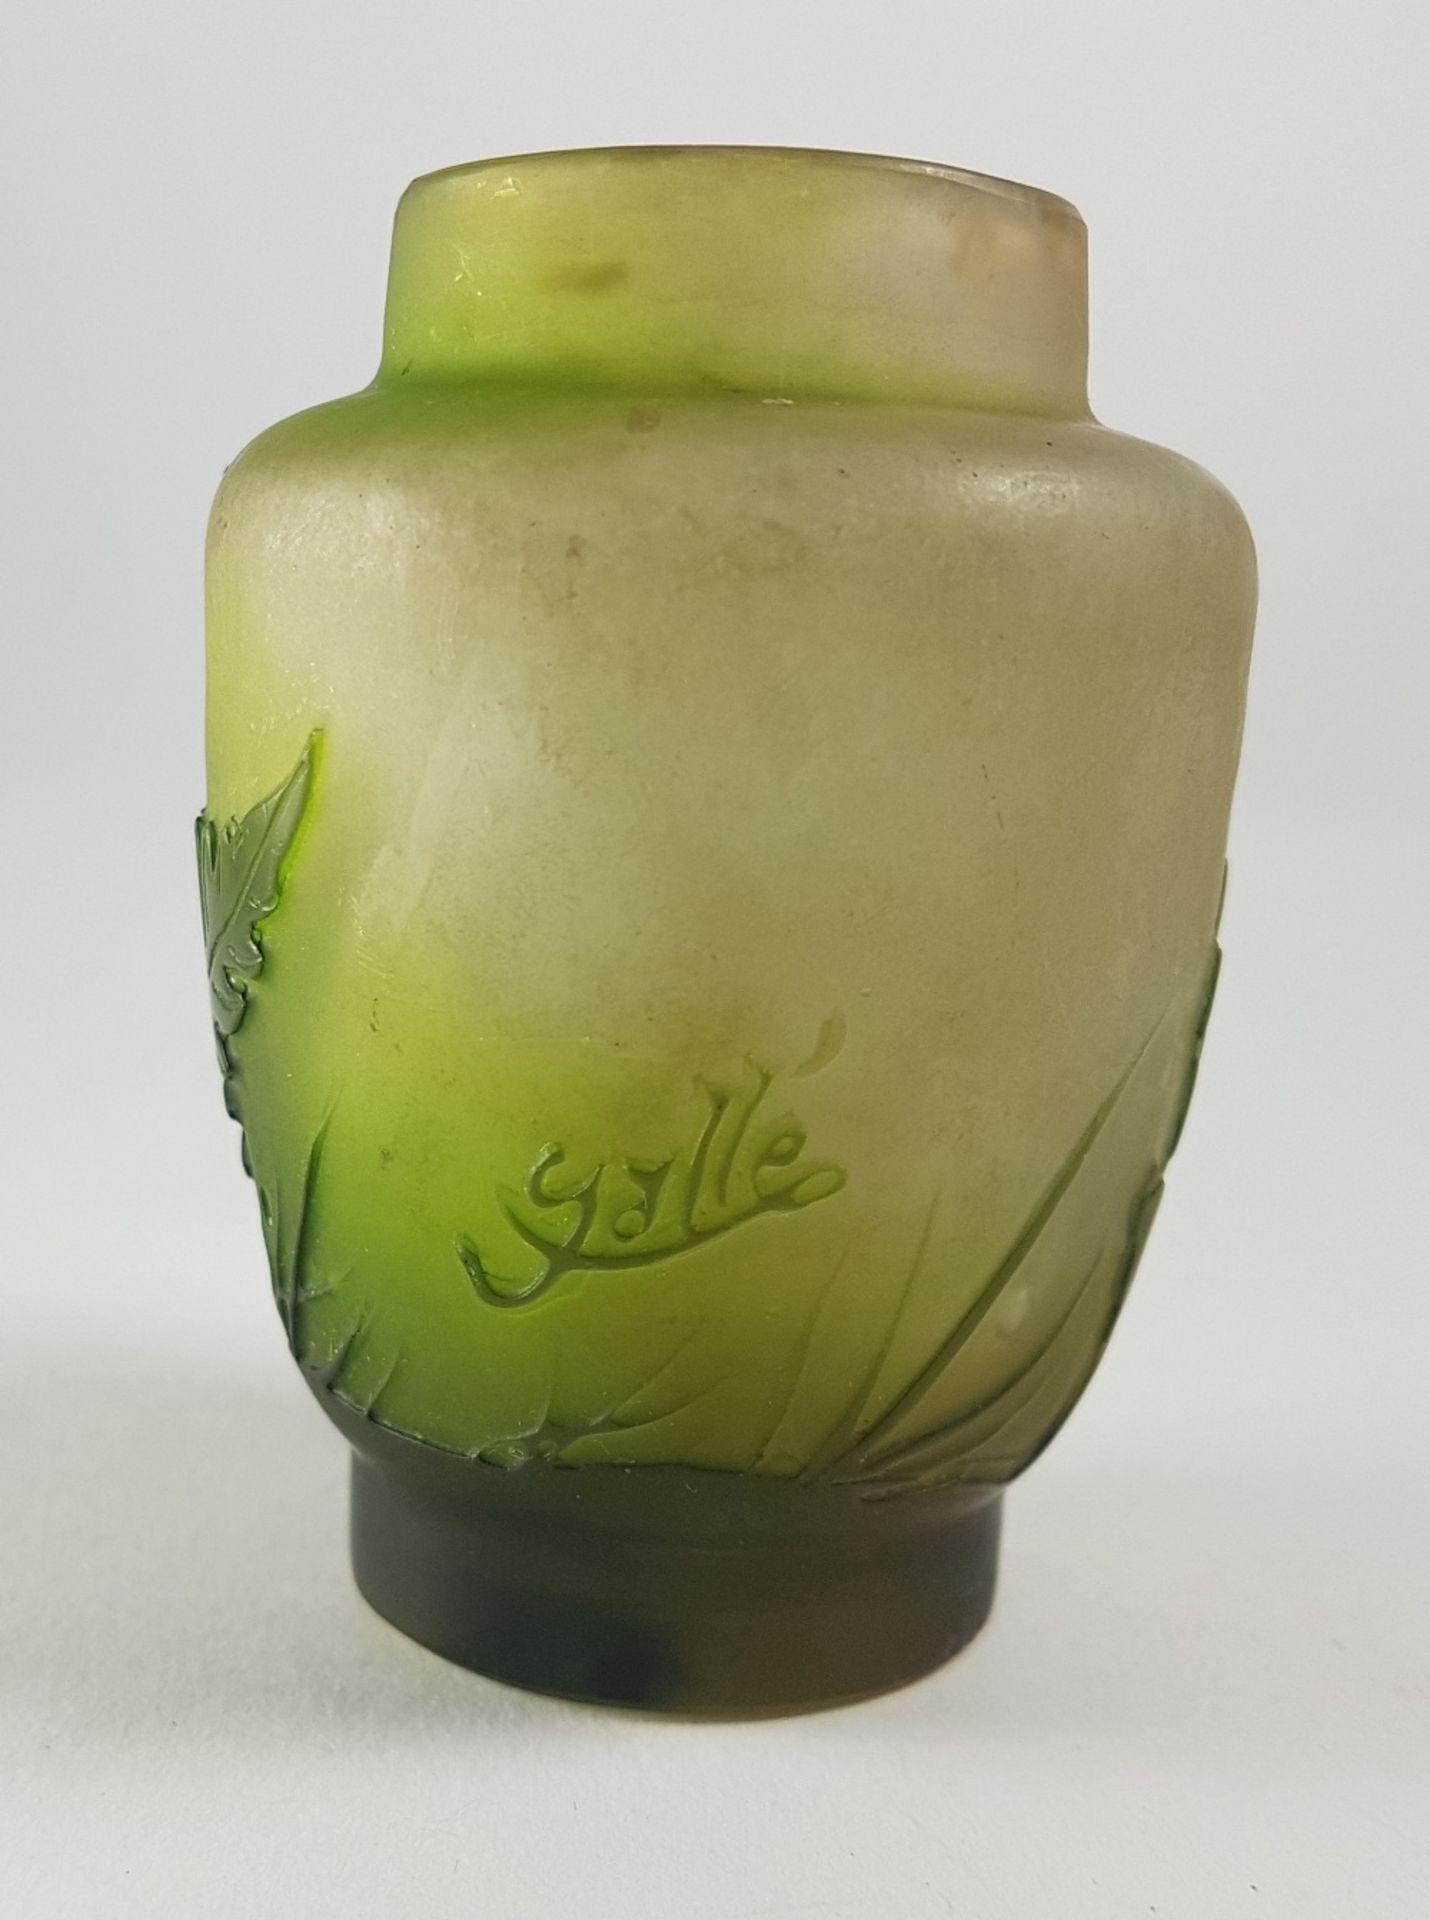 Emile Galle (1846-1904)Ferns; Small multi-layered glass vase with green décor etched in reserve on a - Image 3 of 4